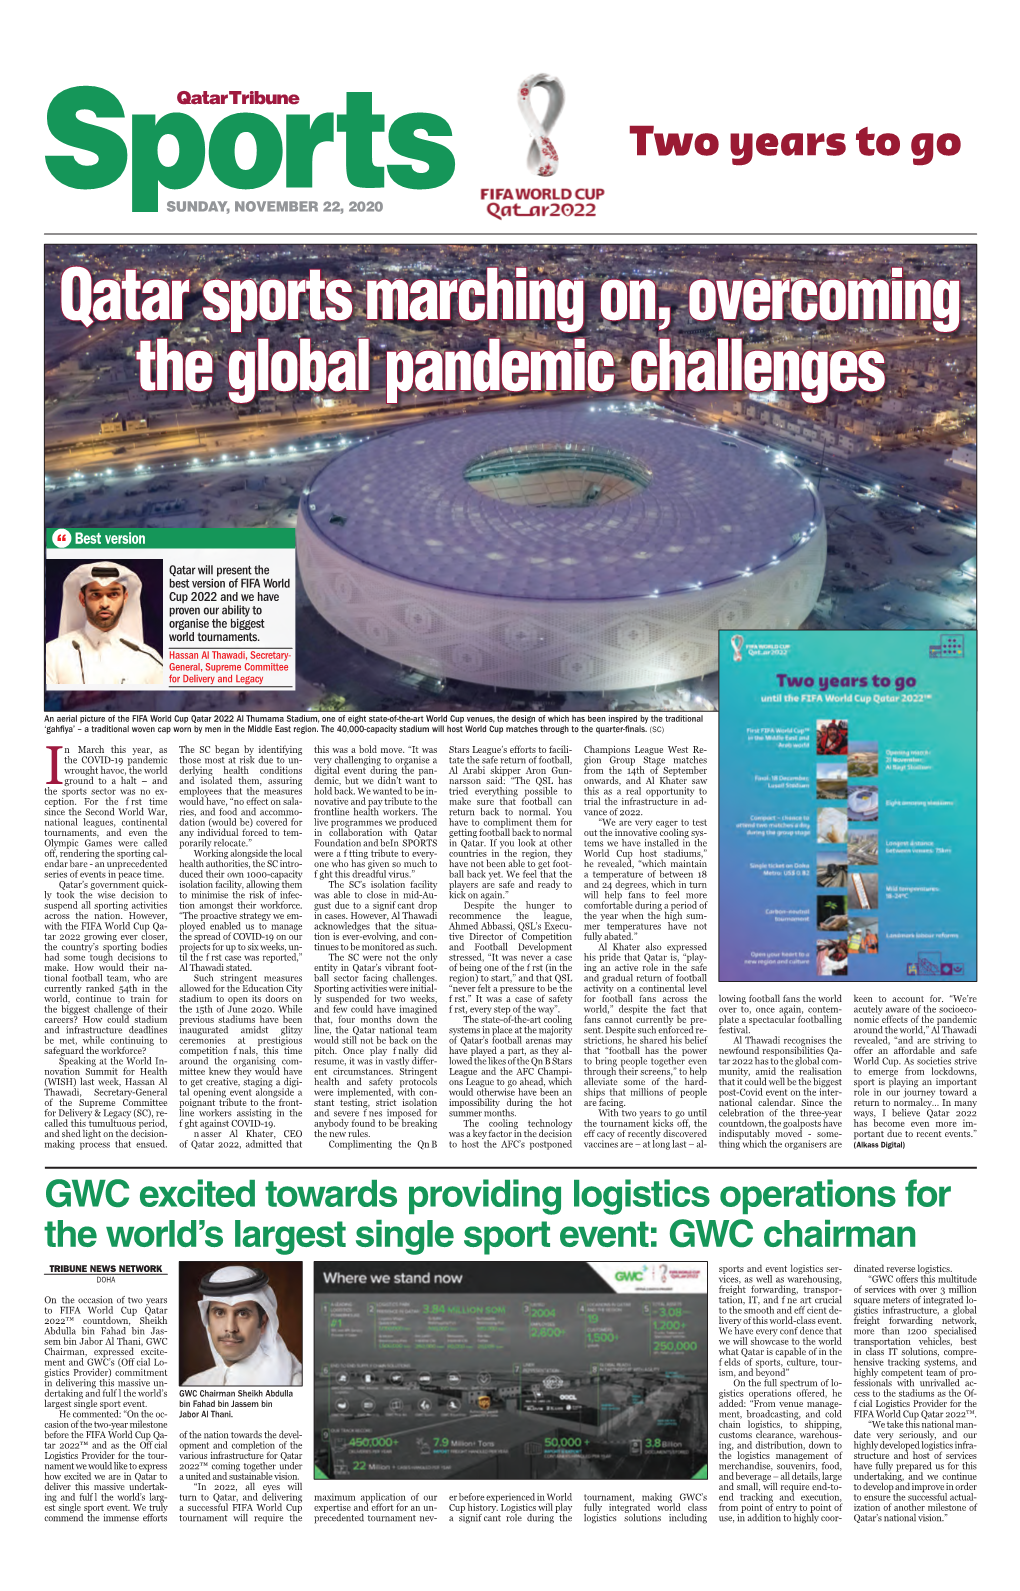 Qatar Sports Marching On, Overcoming the Global Pandemic Challenges